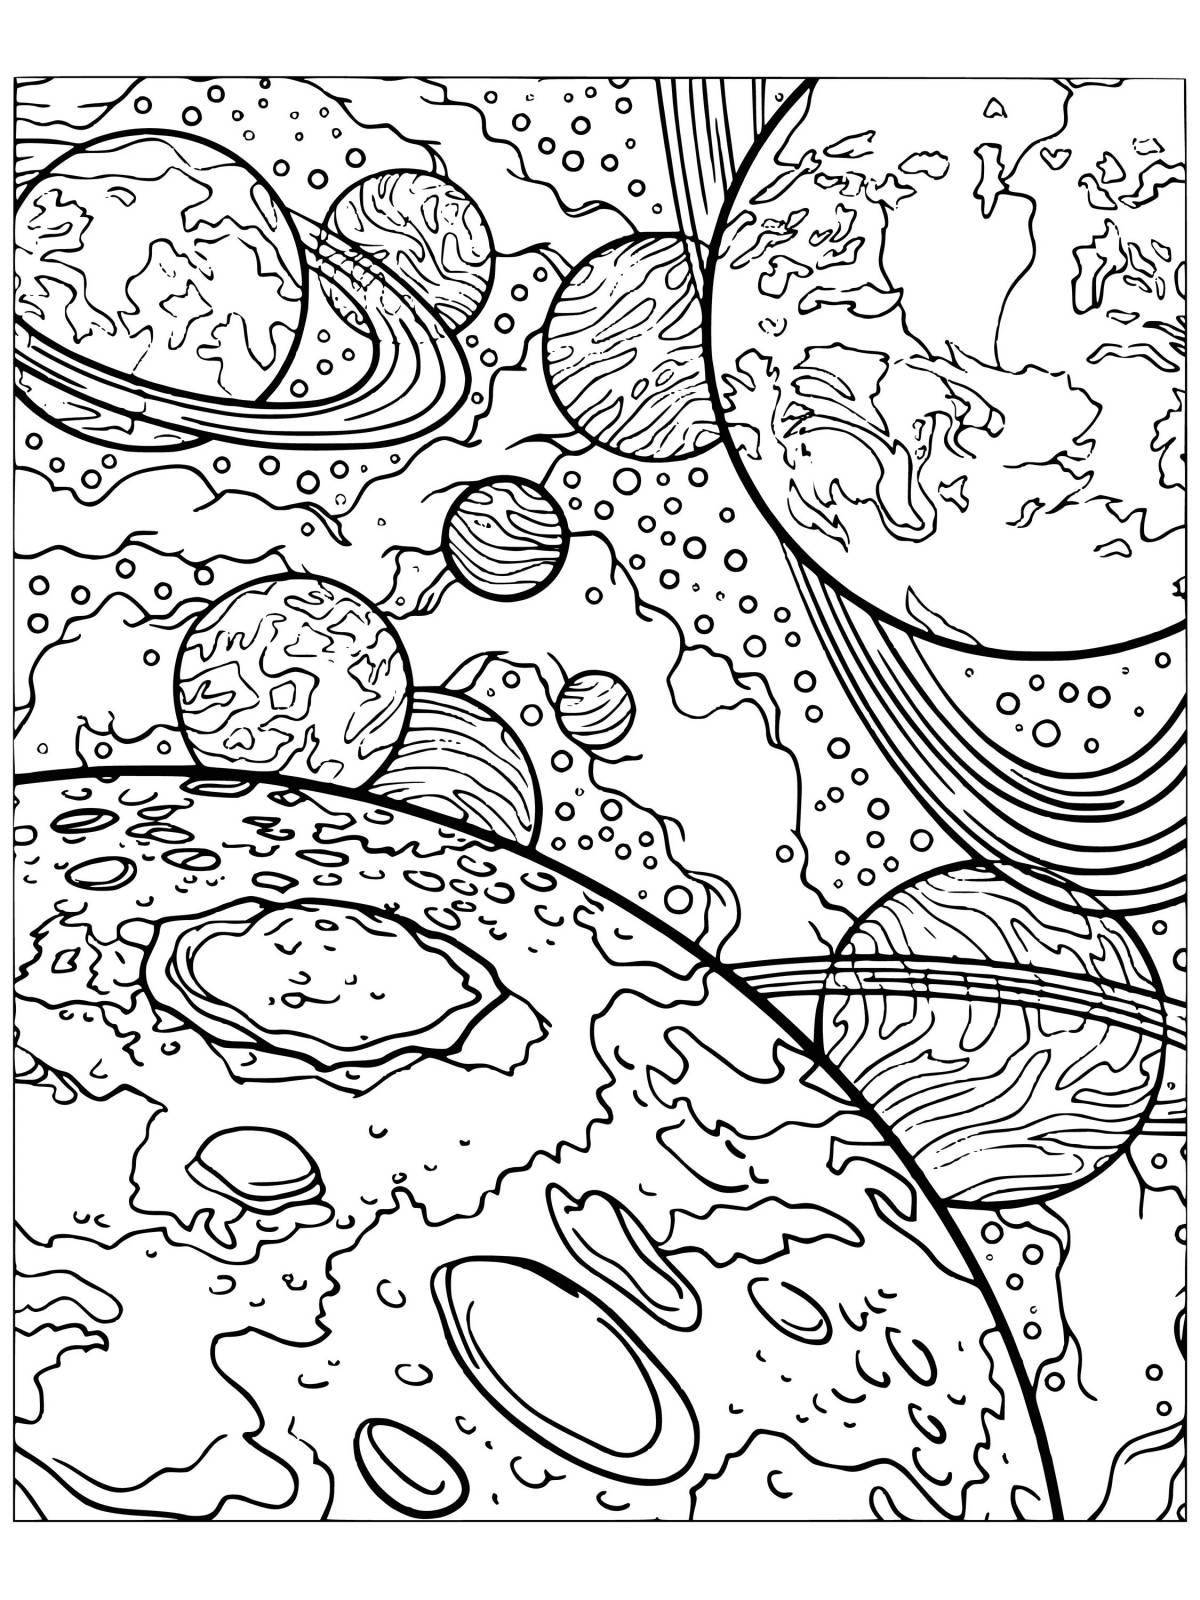 Coloring book wonderful space complex